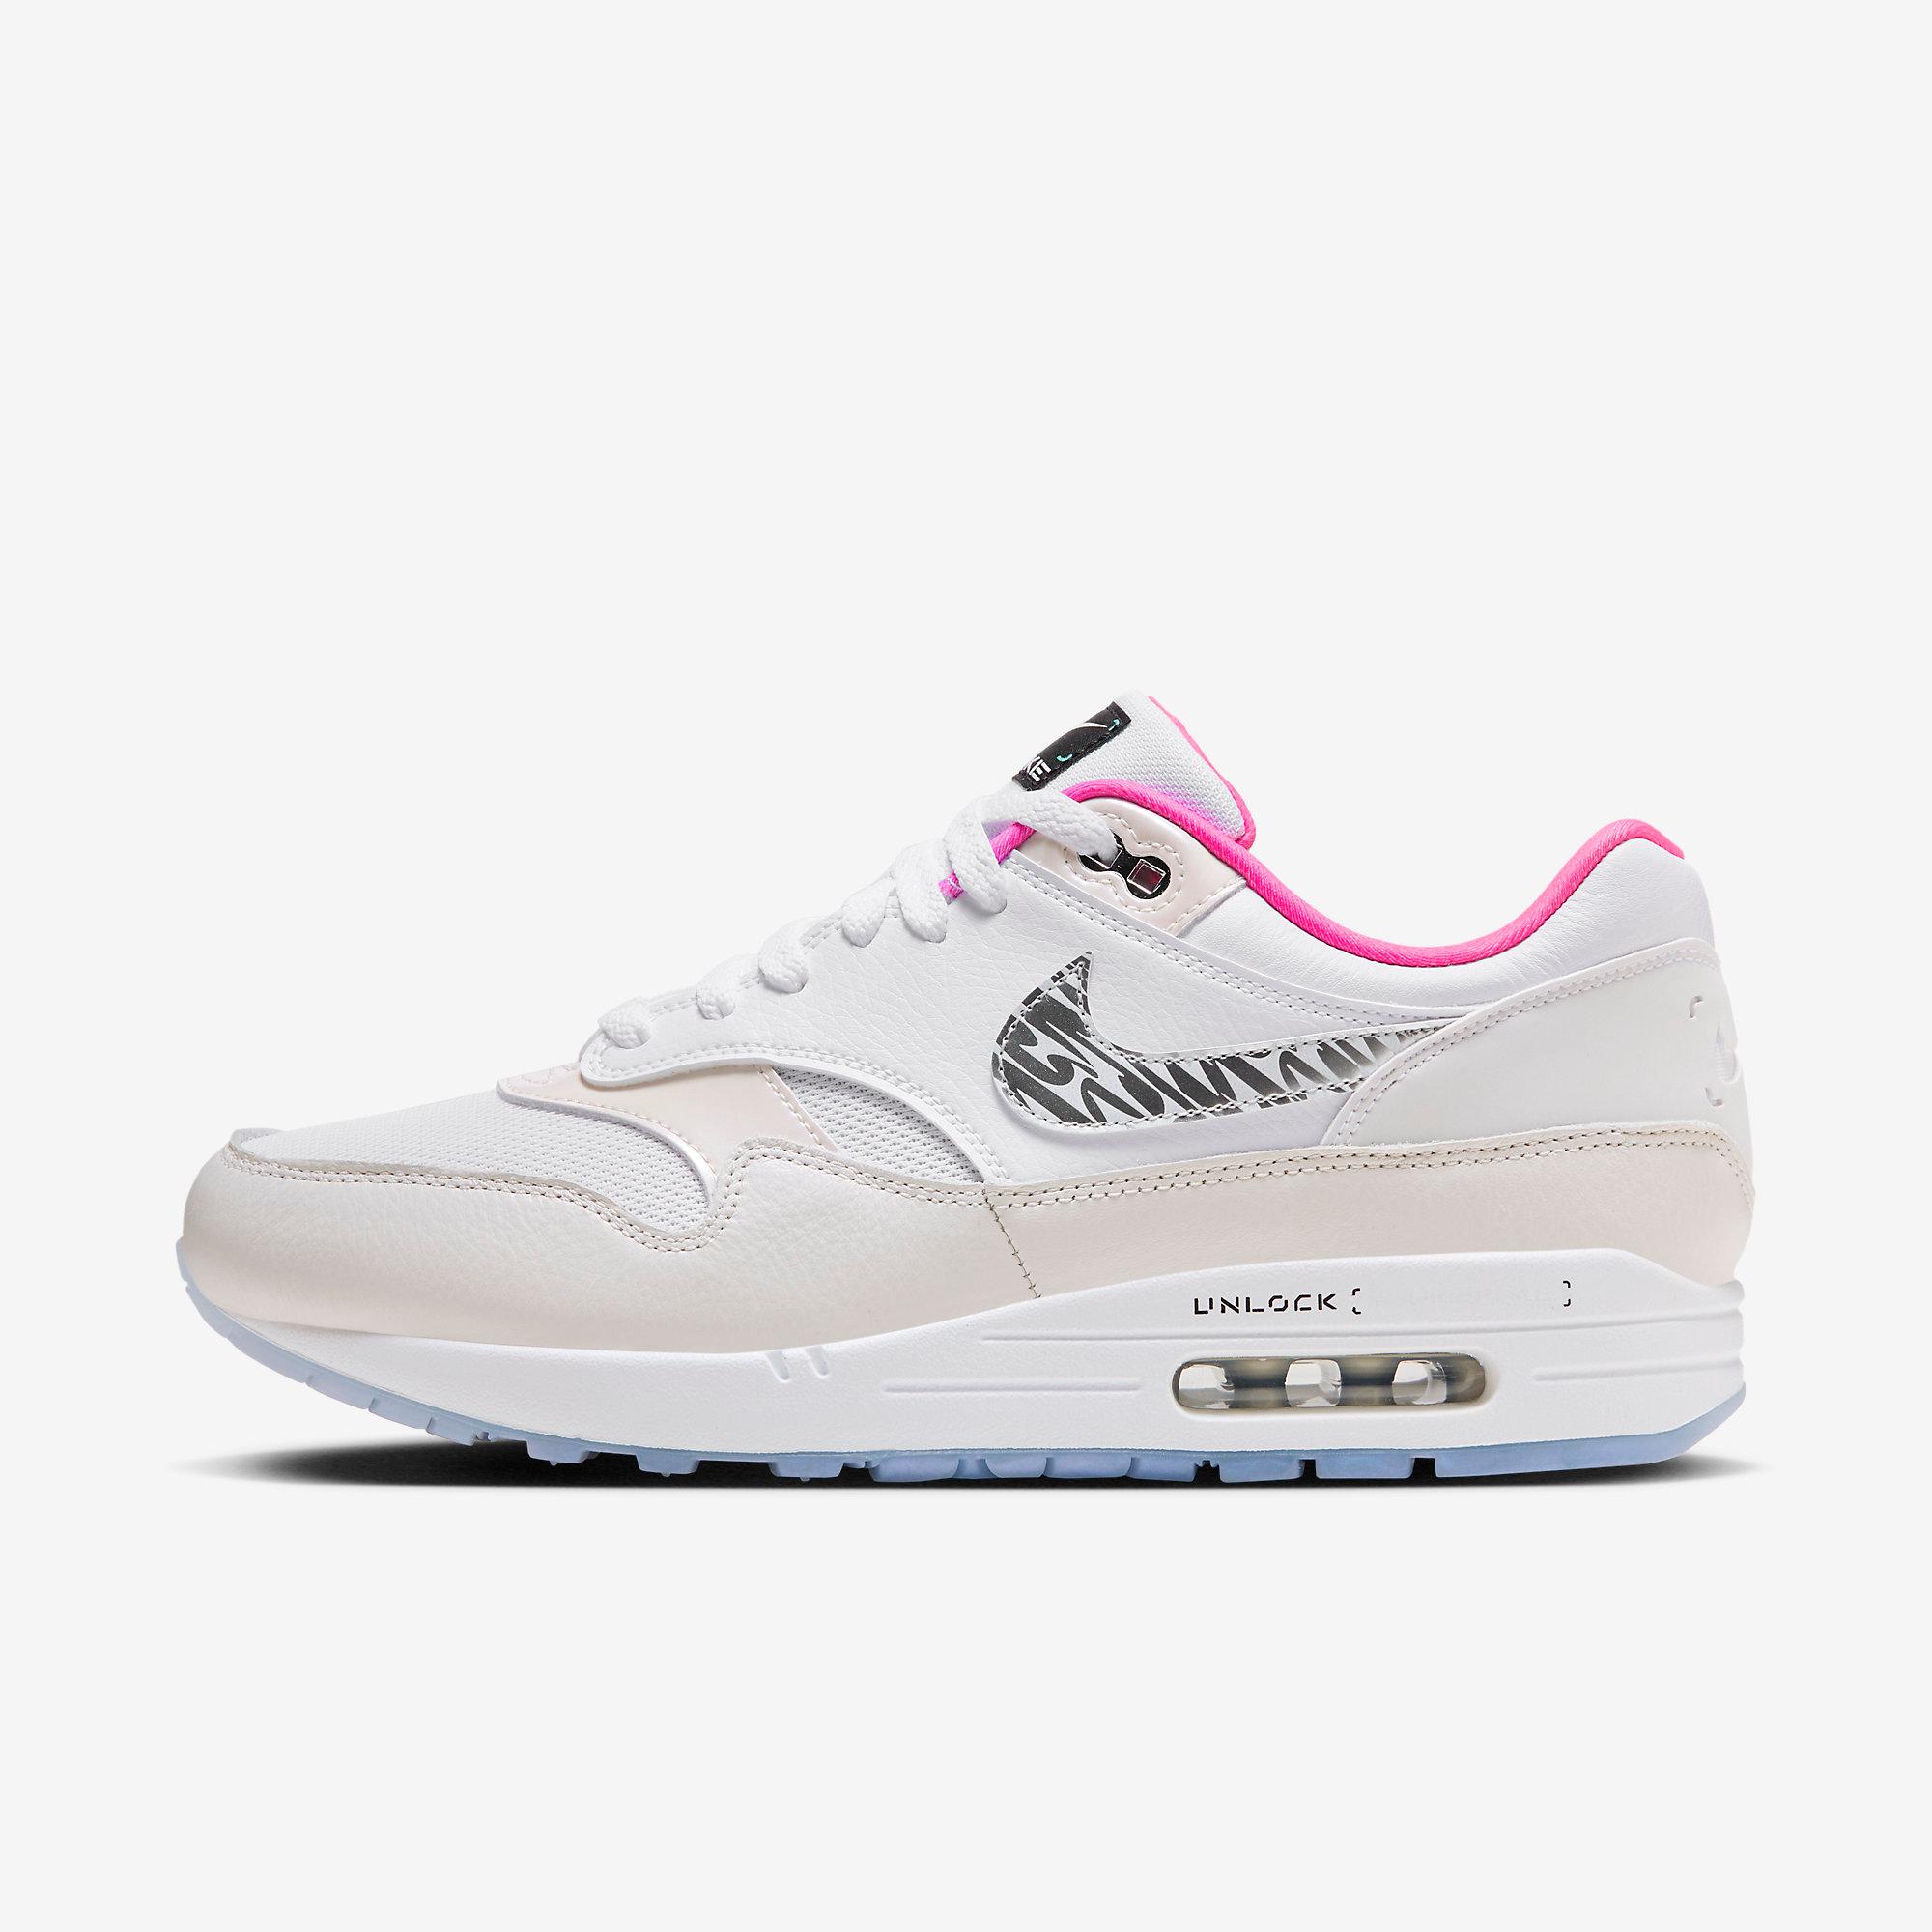 Nike Air Max 1 “Unlock Your Space”